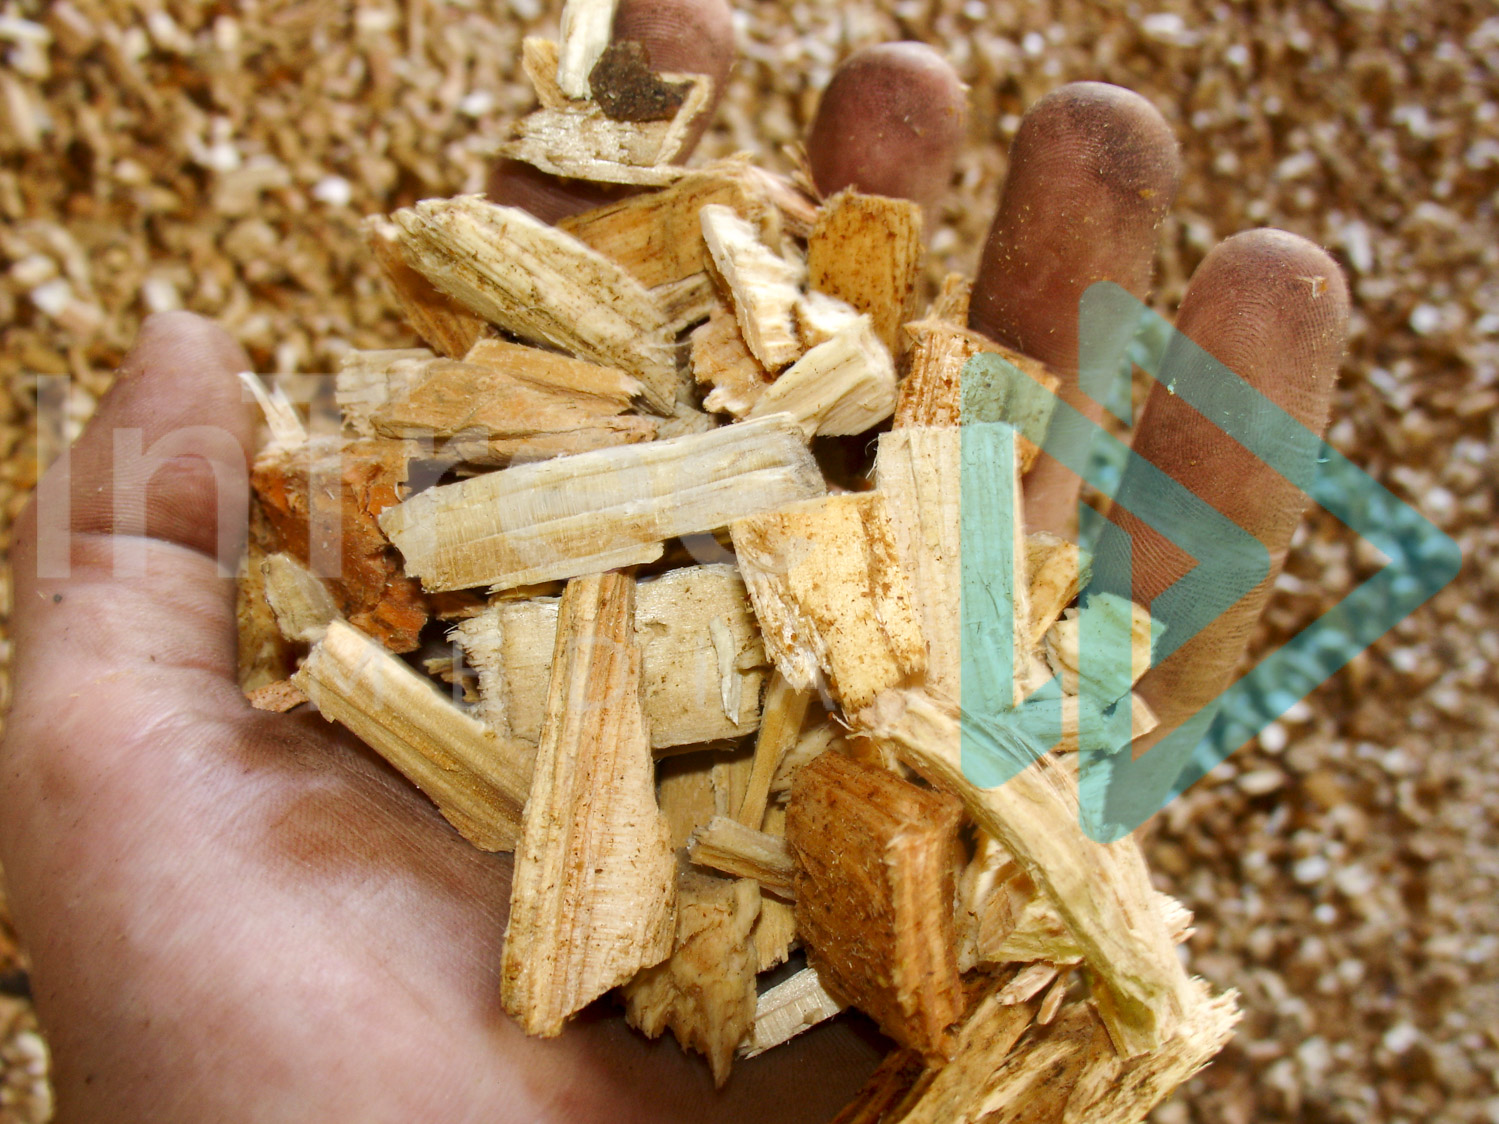 woodchip in a hand 001-21-00051